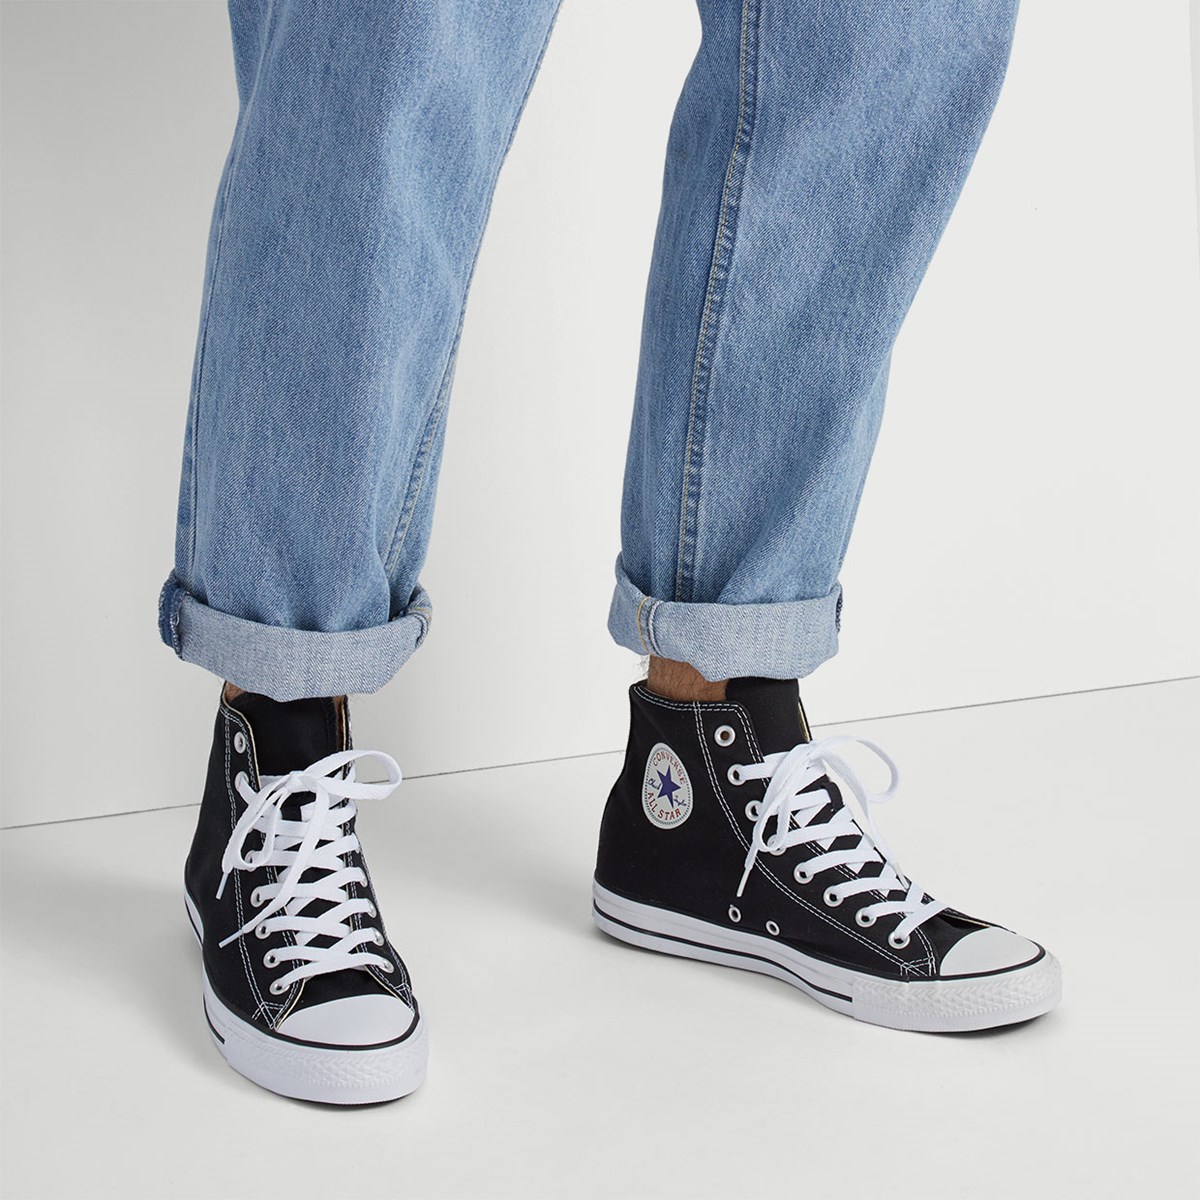 converse taylor all star classic